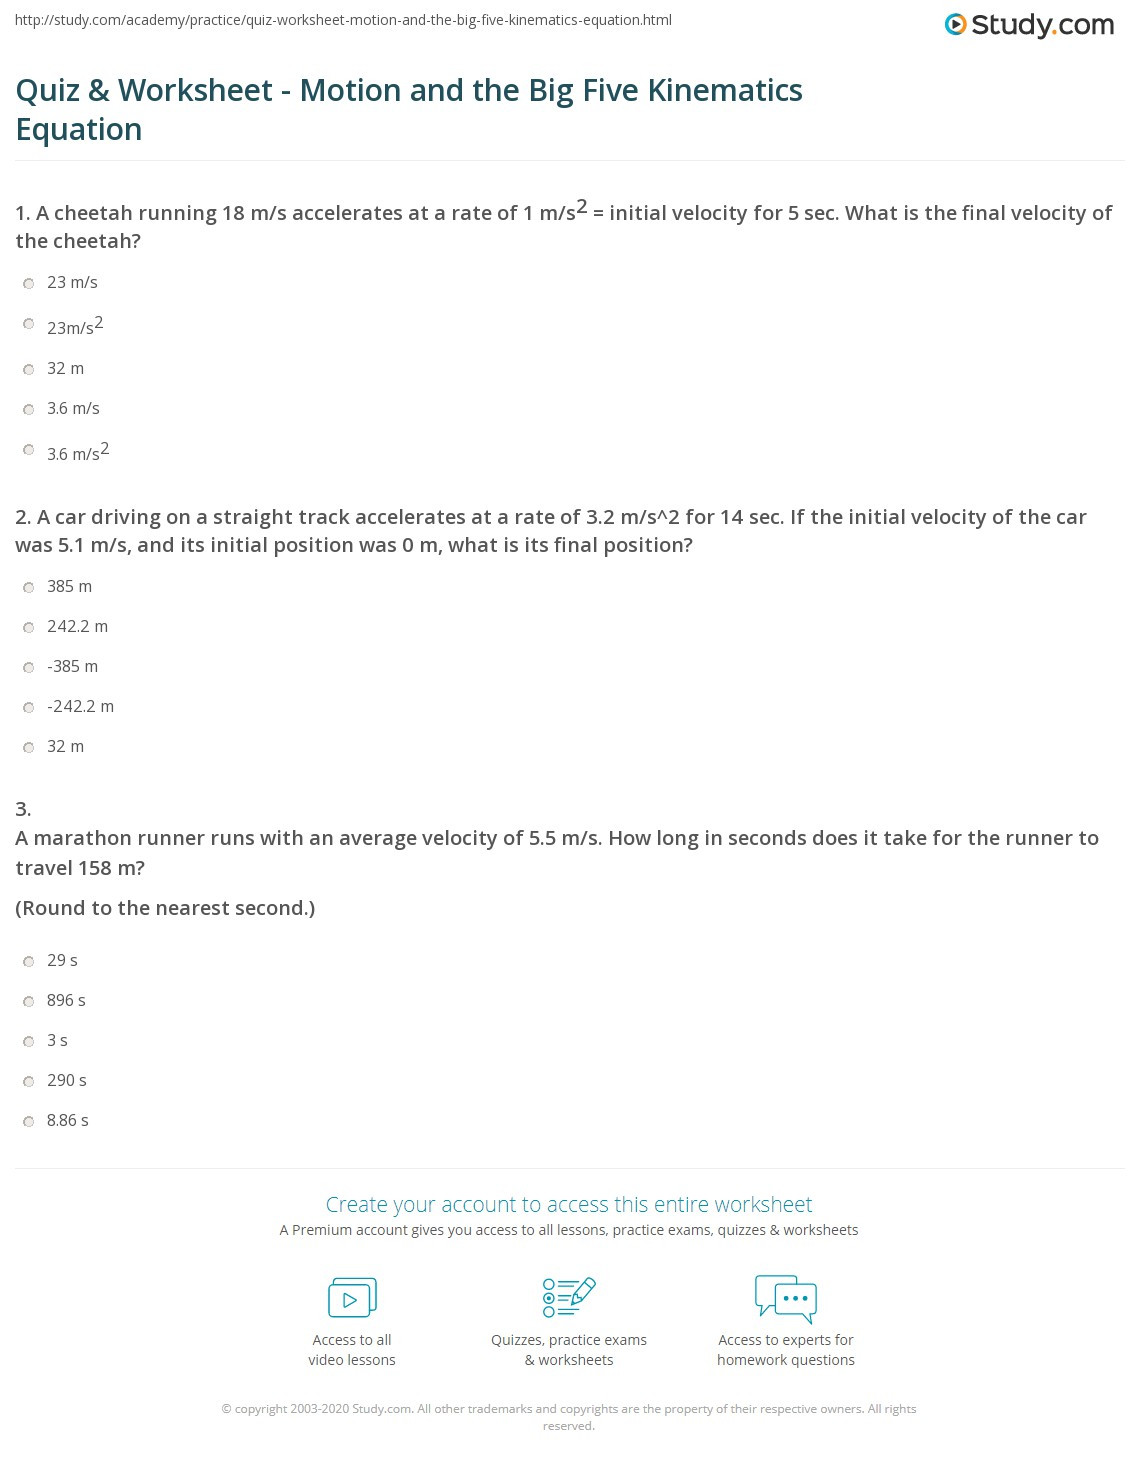 Kinematics Worksheet with Answers Quiz &amp; Worksheet Motion and the Big Five Kinematics